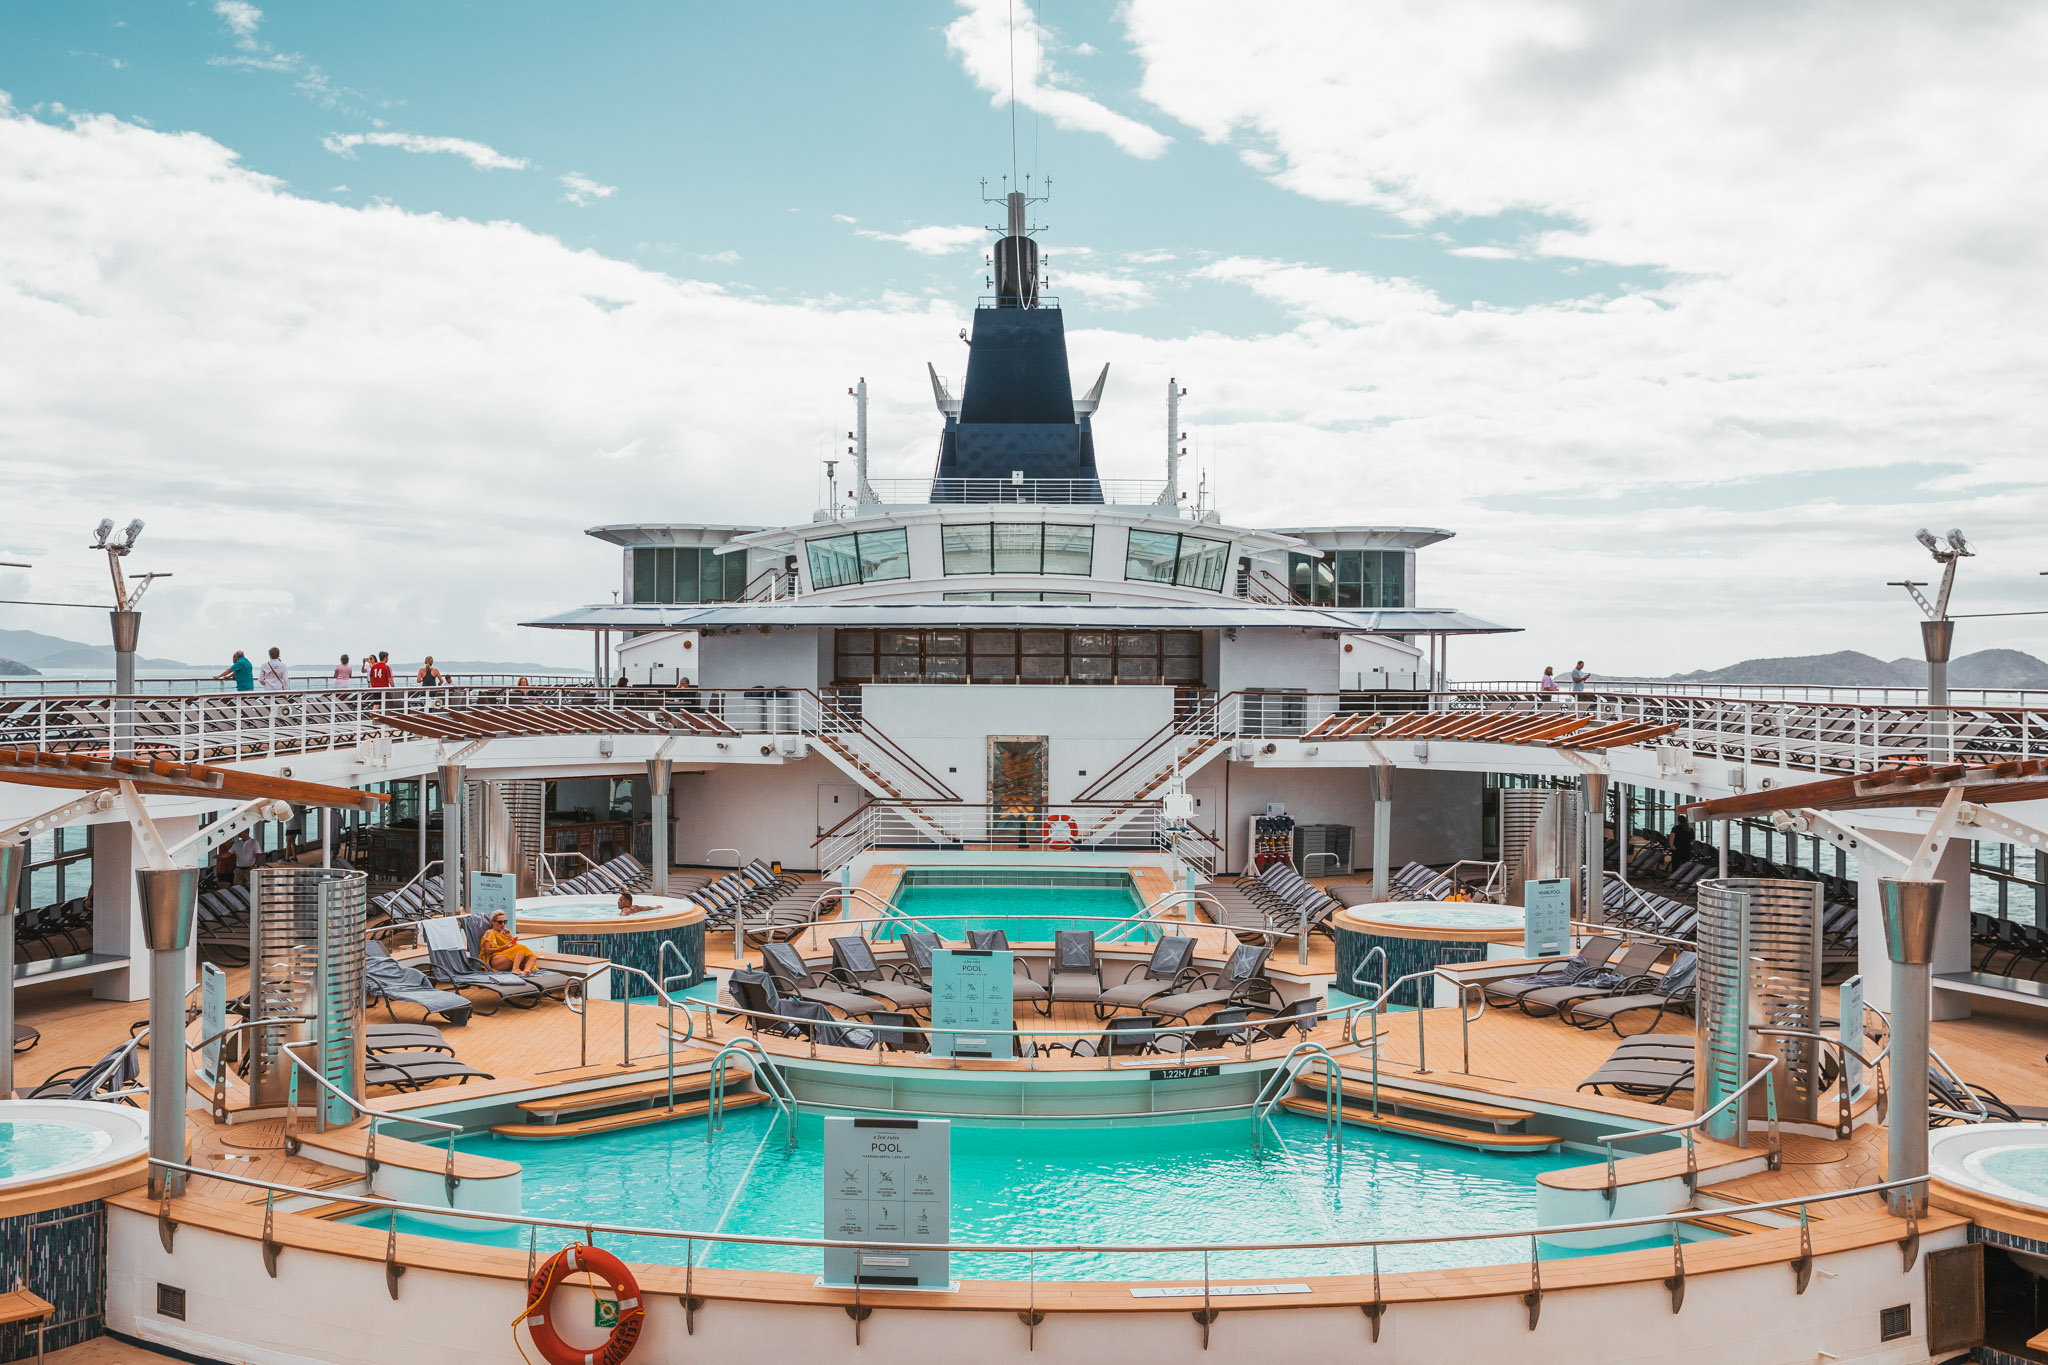 Main pools on deck 10 // Cruise Review: Everything You Need To Know About The Celebrity Summit